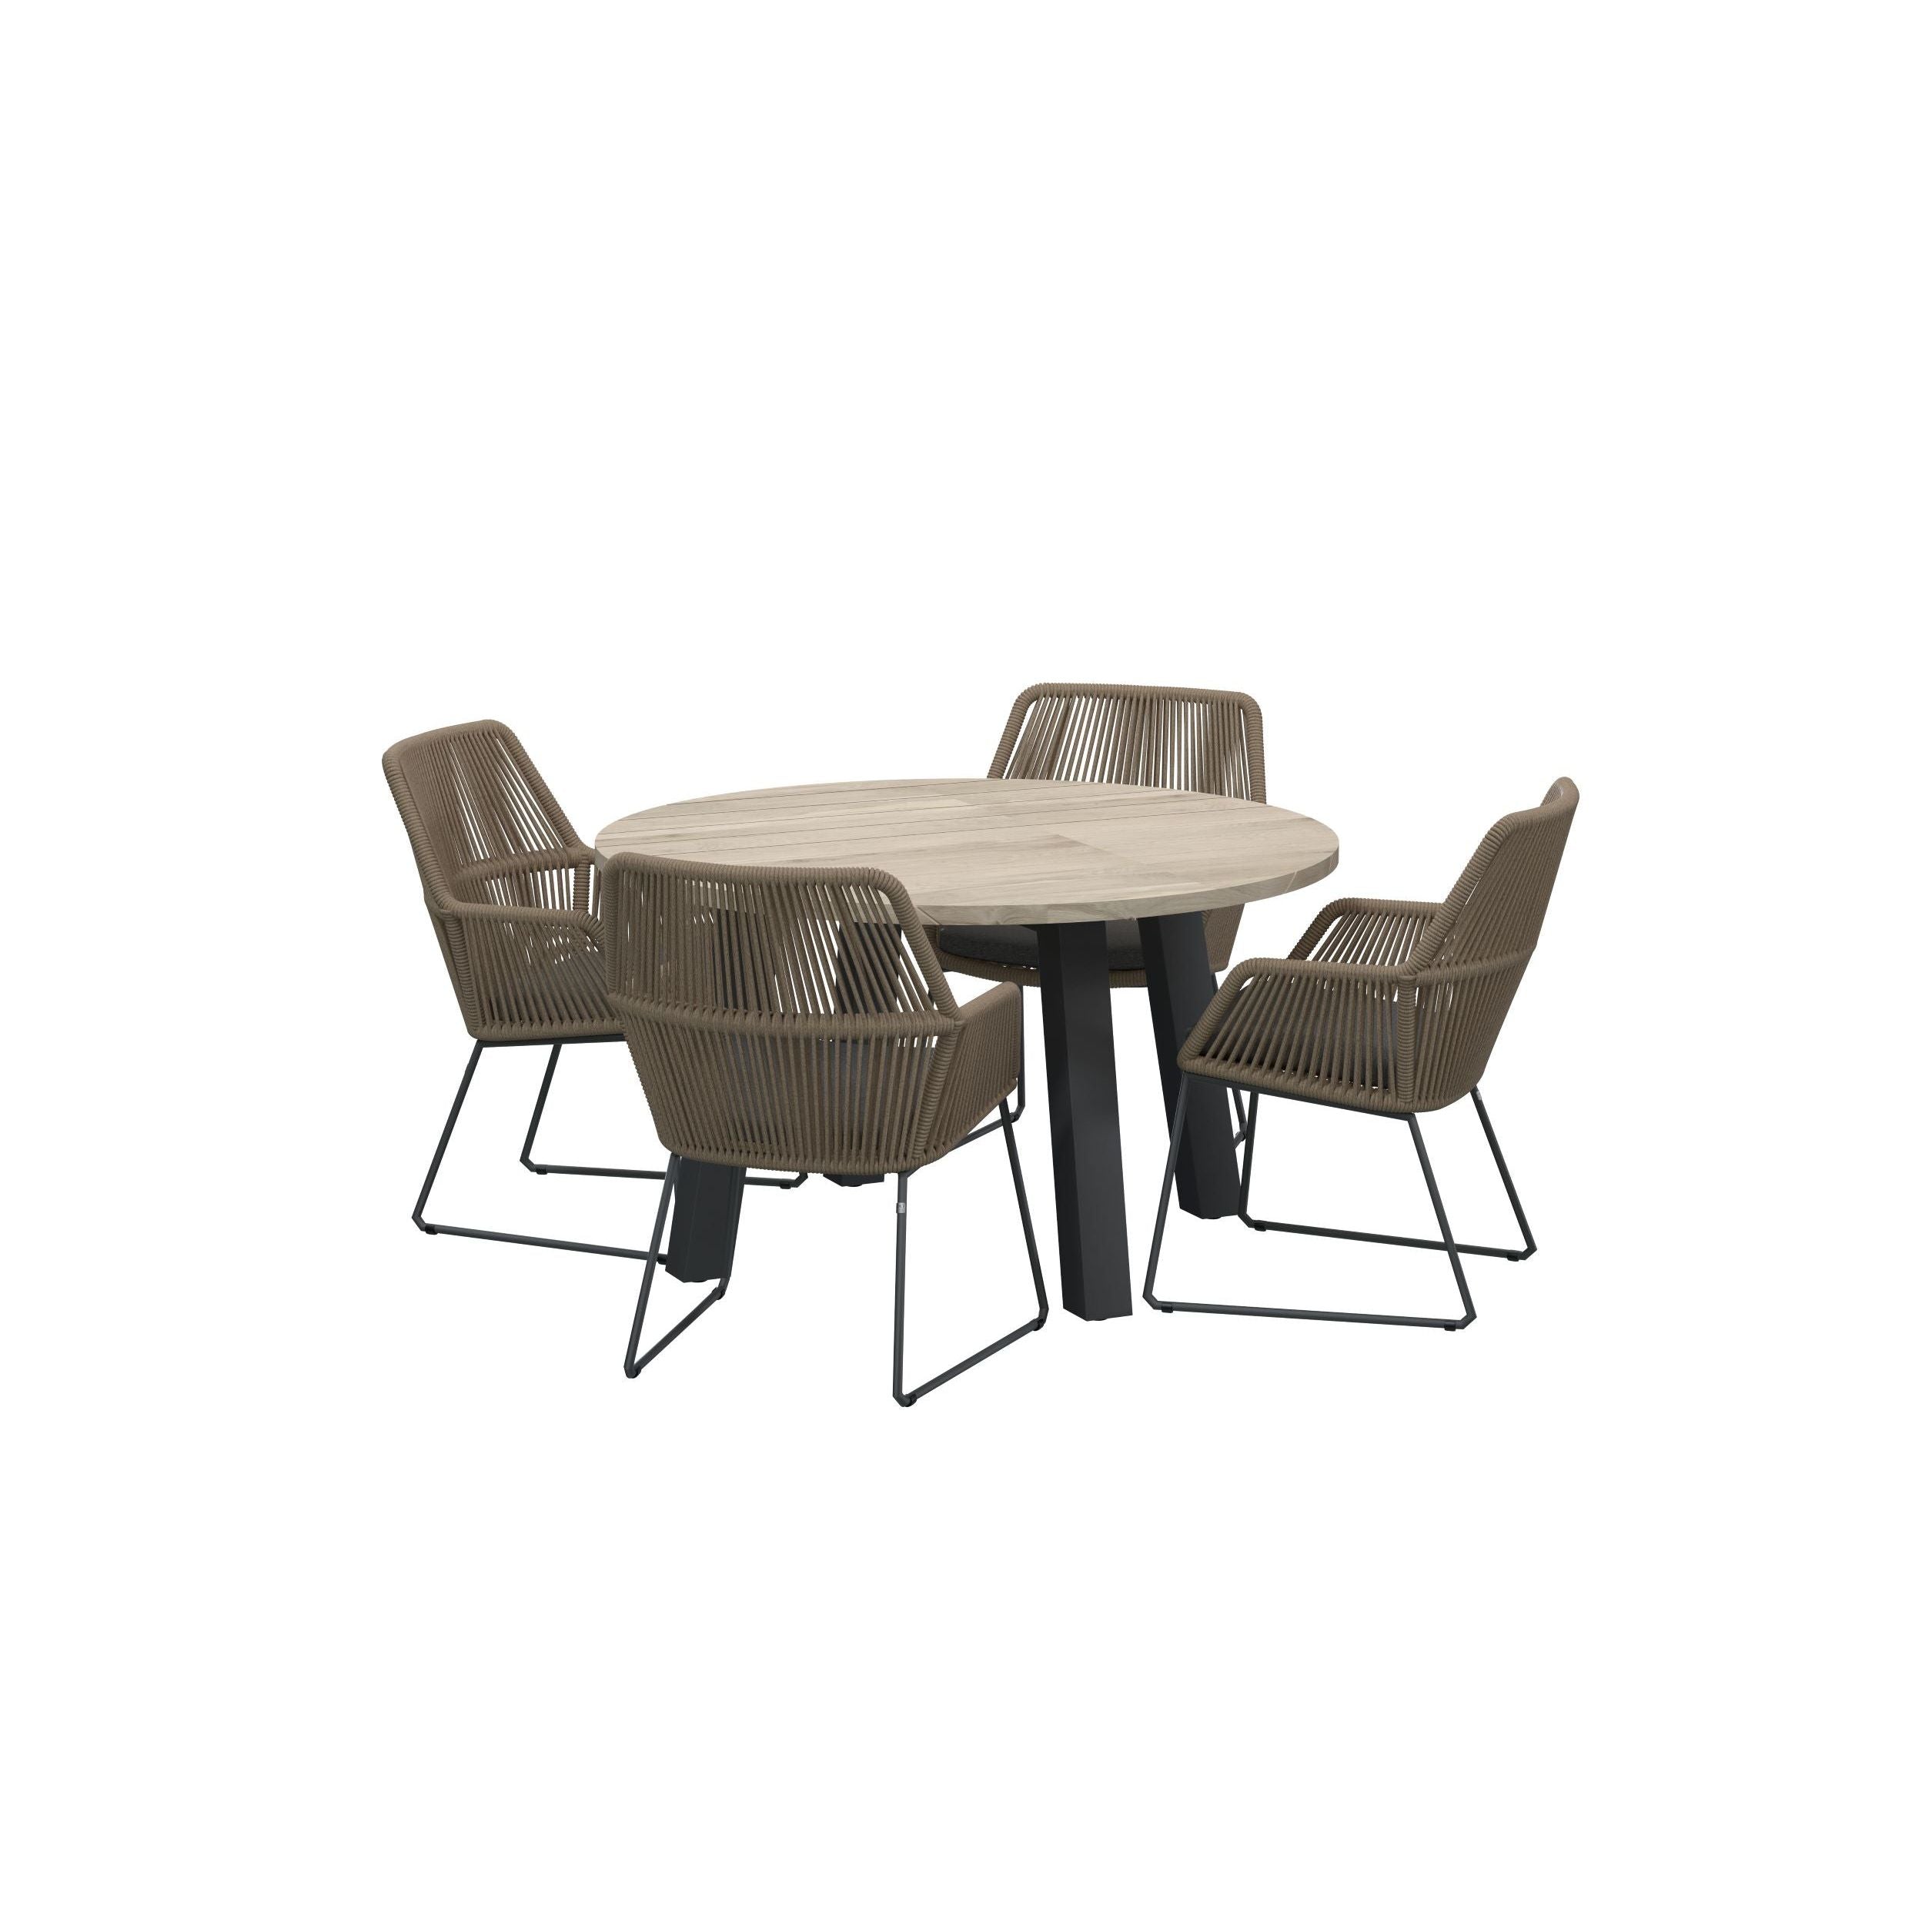 4 Seasons Outdoor Ramblas 4 Seater Dining Set with Derby Table and Teak Top